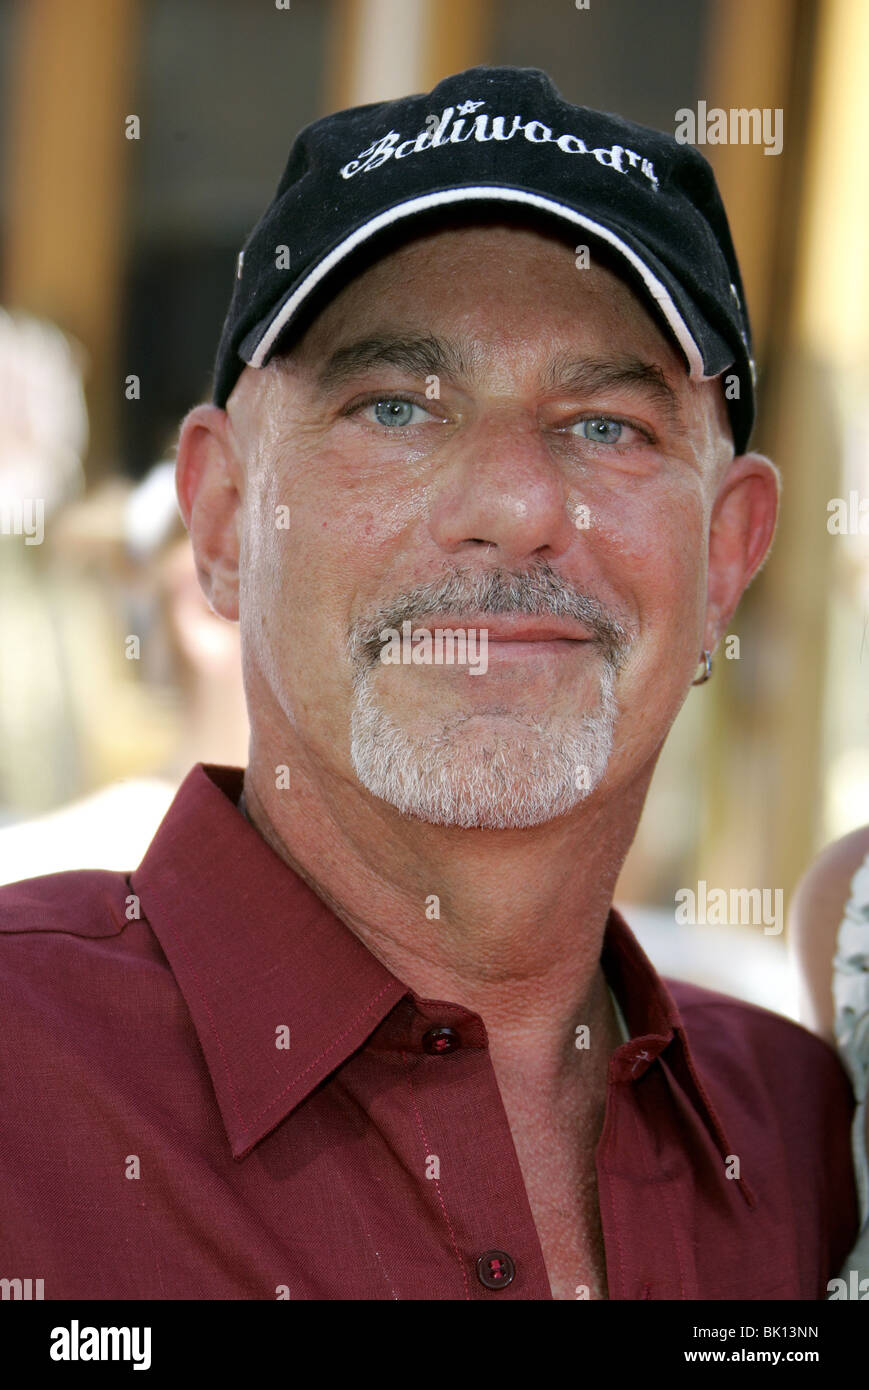 ROB COHEN THE FAST AND THE FURIOUS: TOKYO DRIFT CITYWALK UNIVERSAL STUDIOS LOS ANGELES USA 04 June 2006 Stock Photo